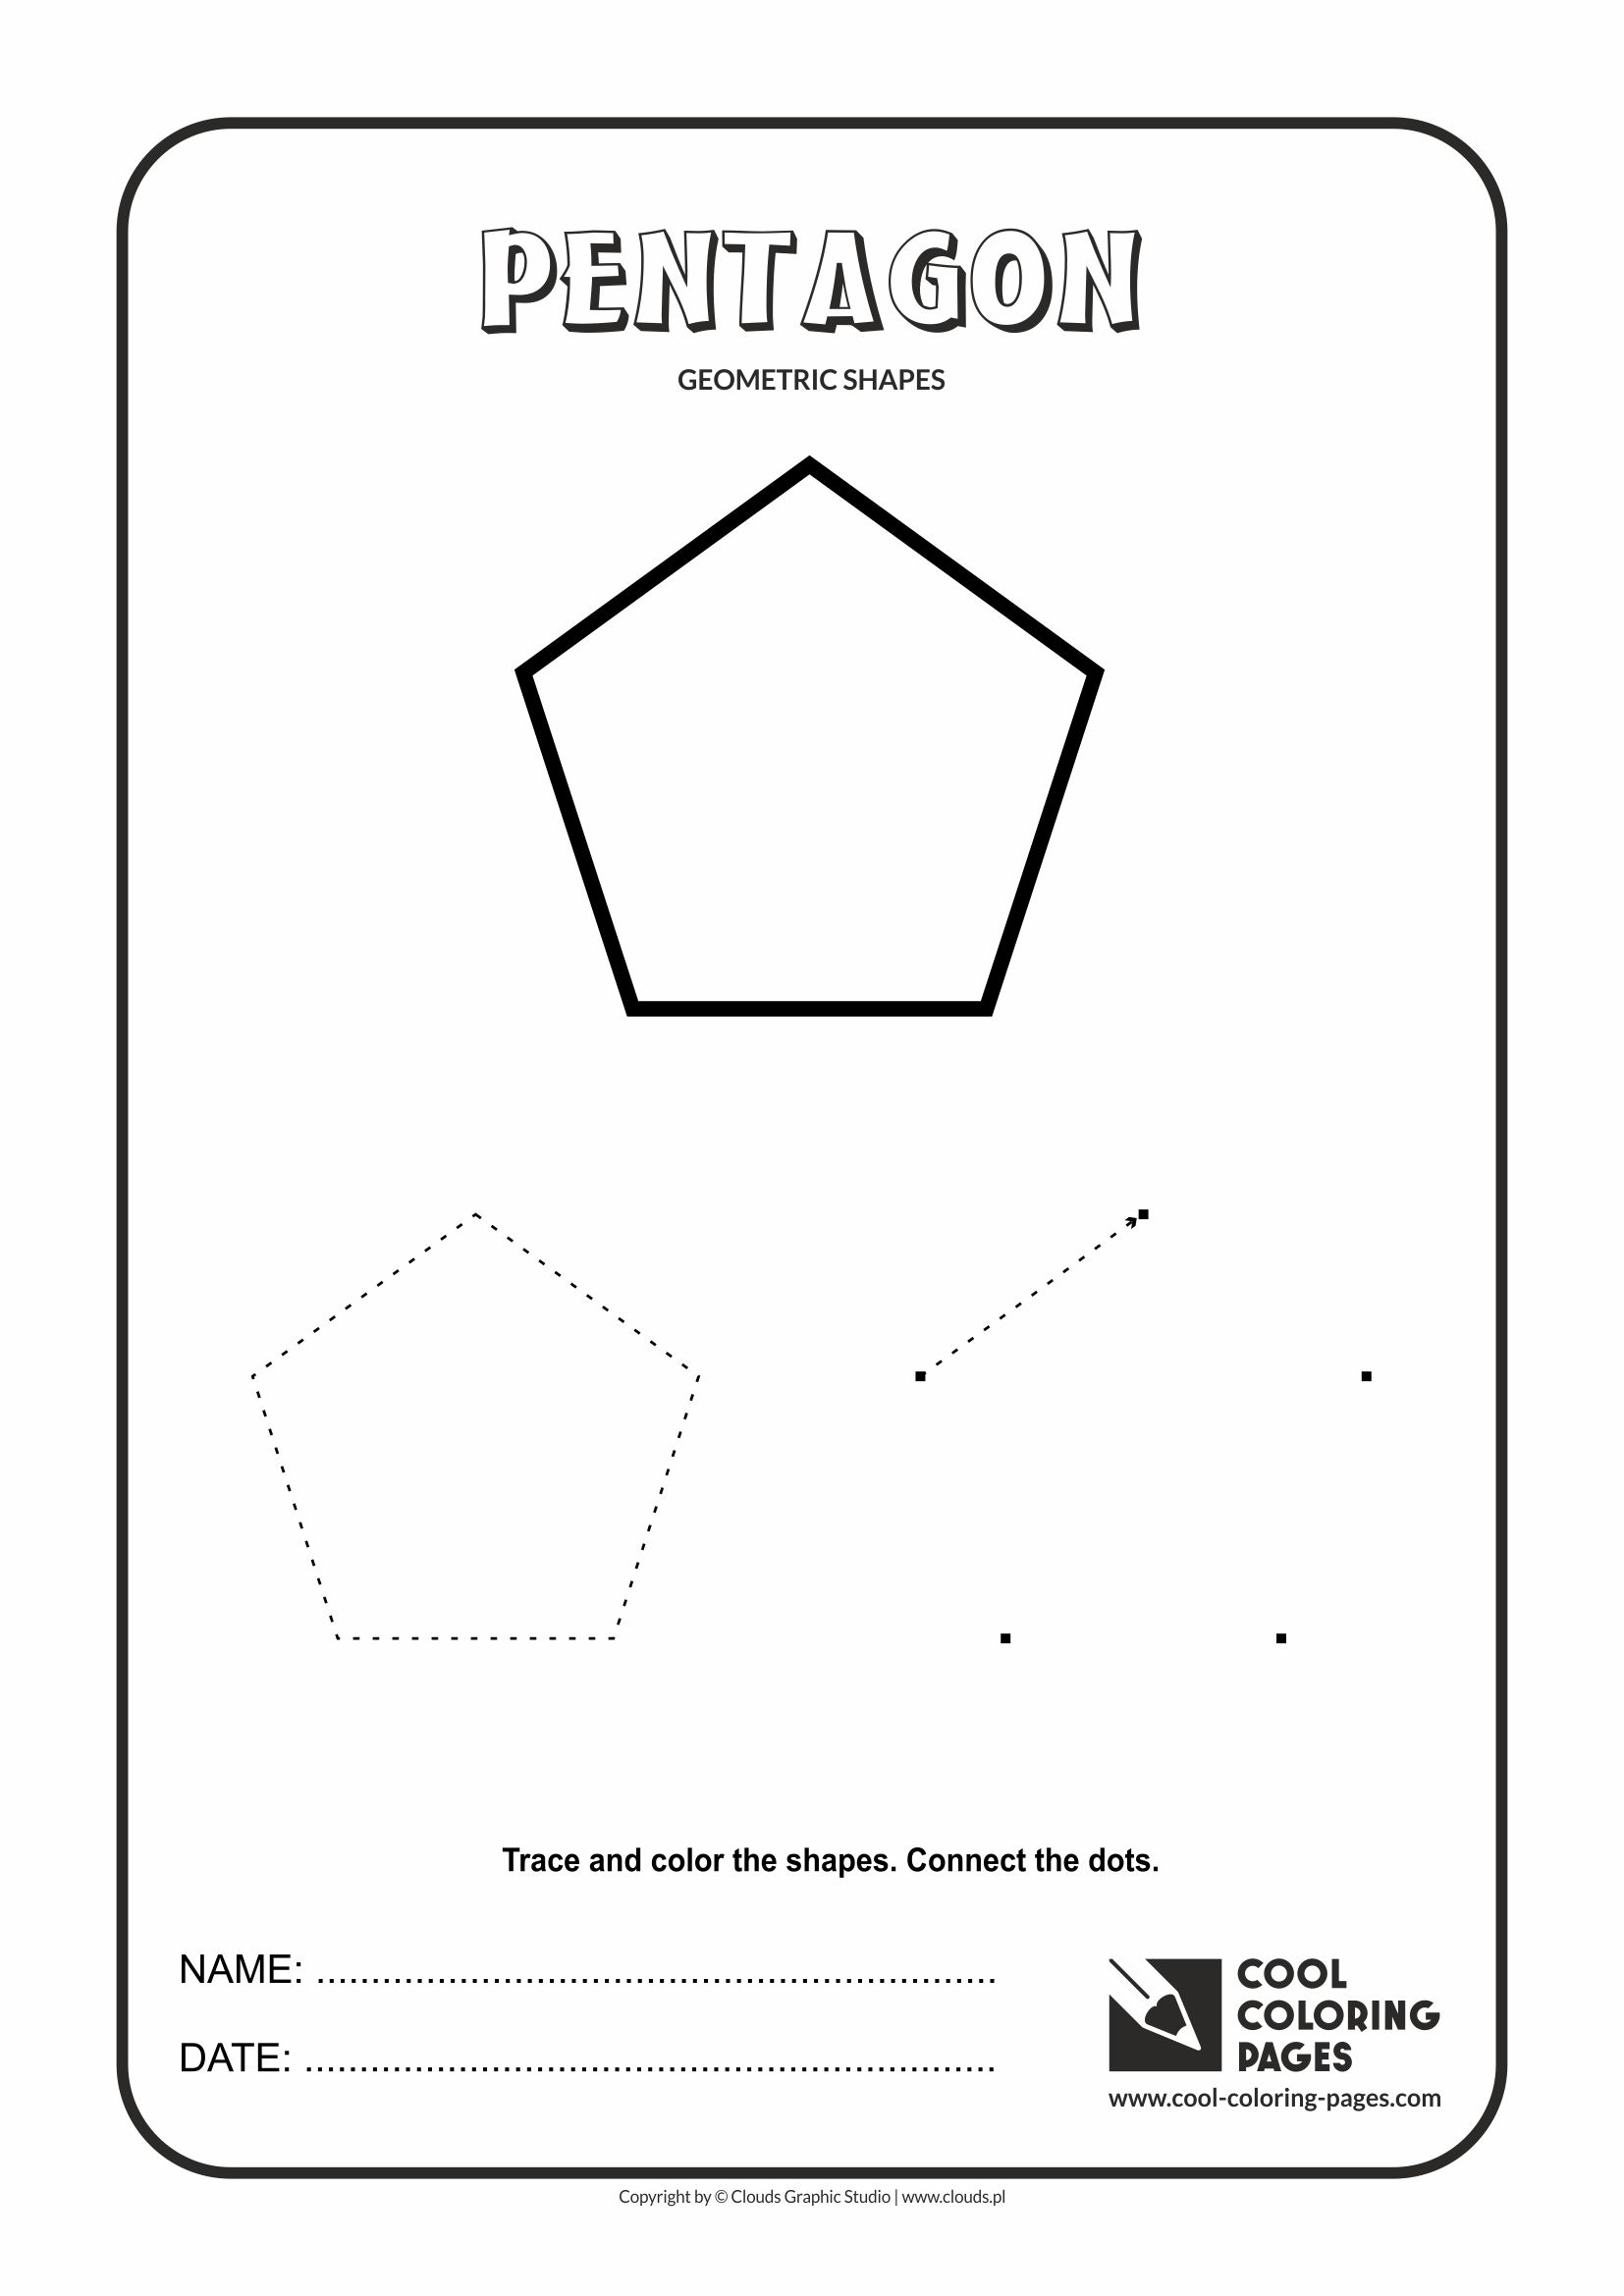 Cool Coloring Pages Geometric Shapes - Cool Coloring Pages | Free